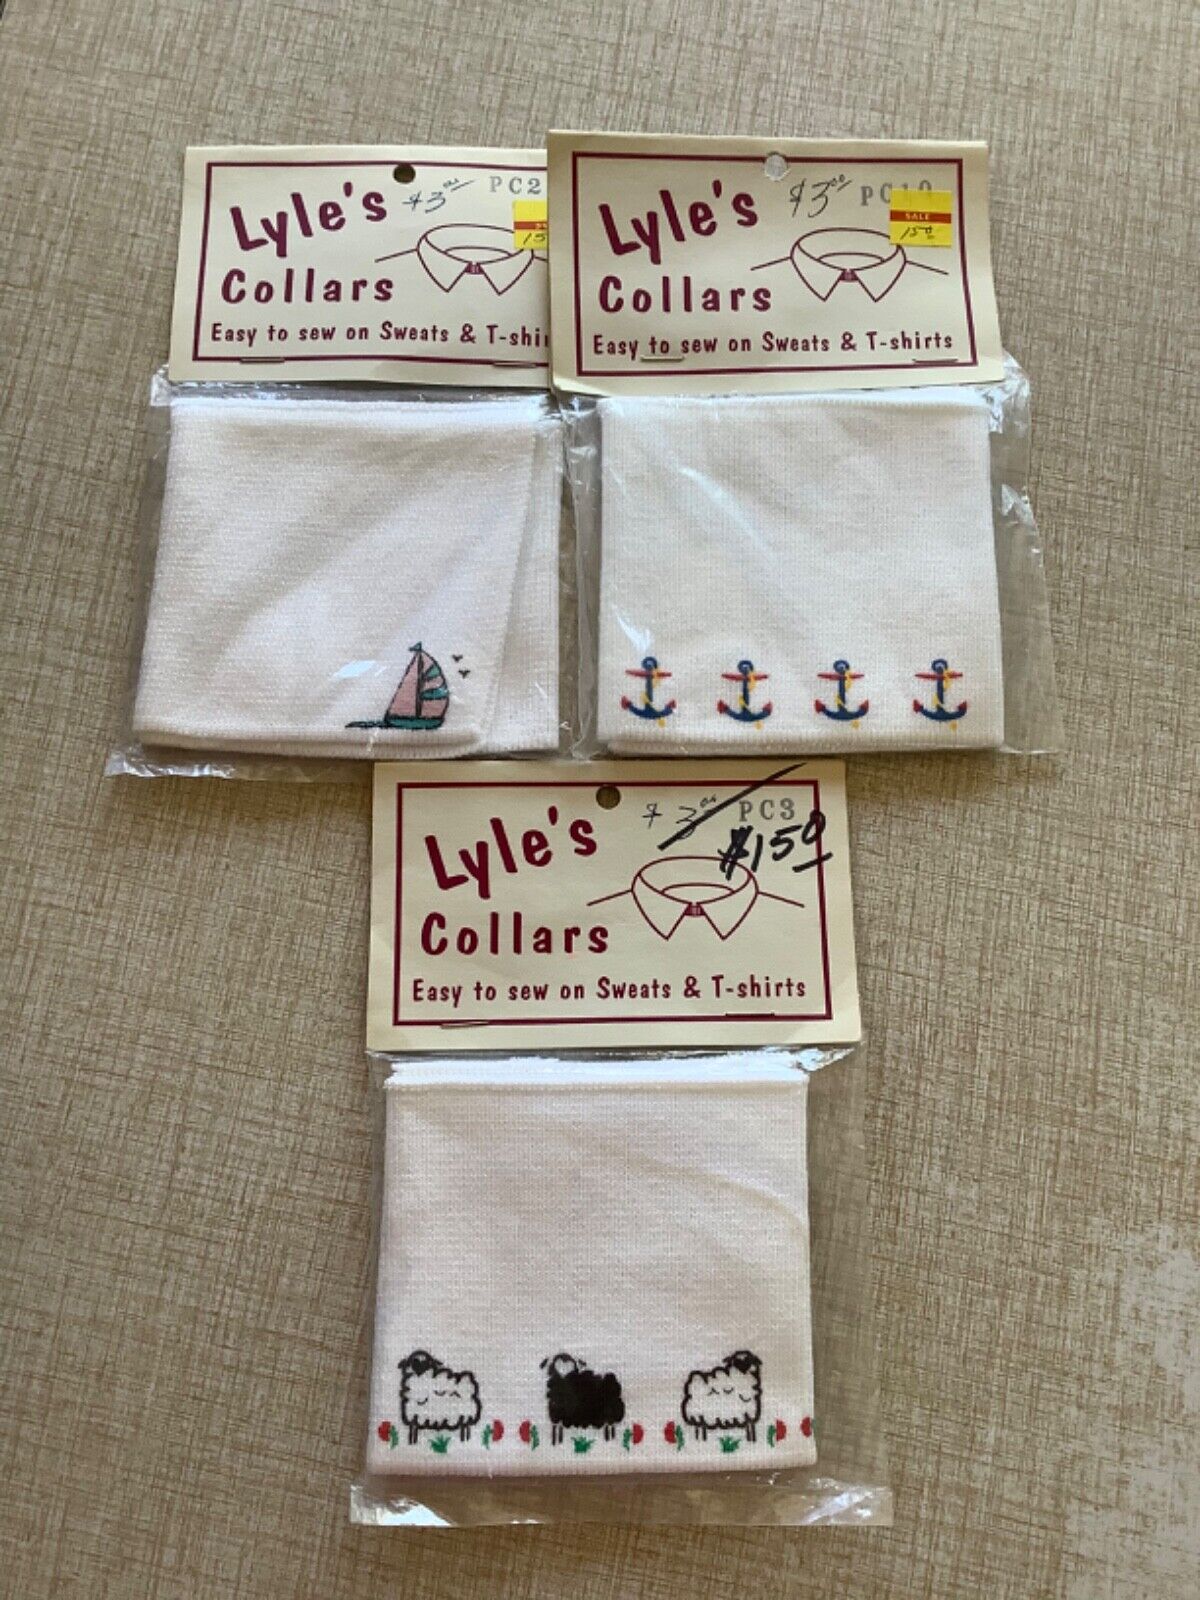 3 Vintage LYLE’S Sweat & T-Shirt Novelty COLLARS Sew-On Notions Nautical & Sheep